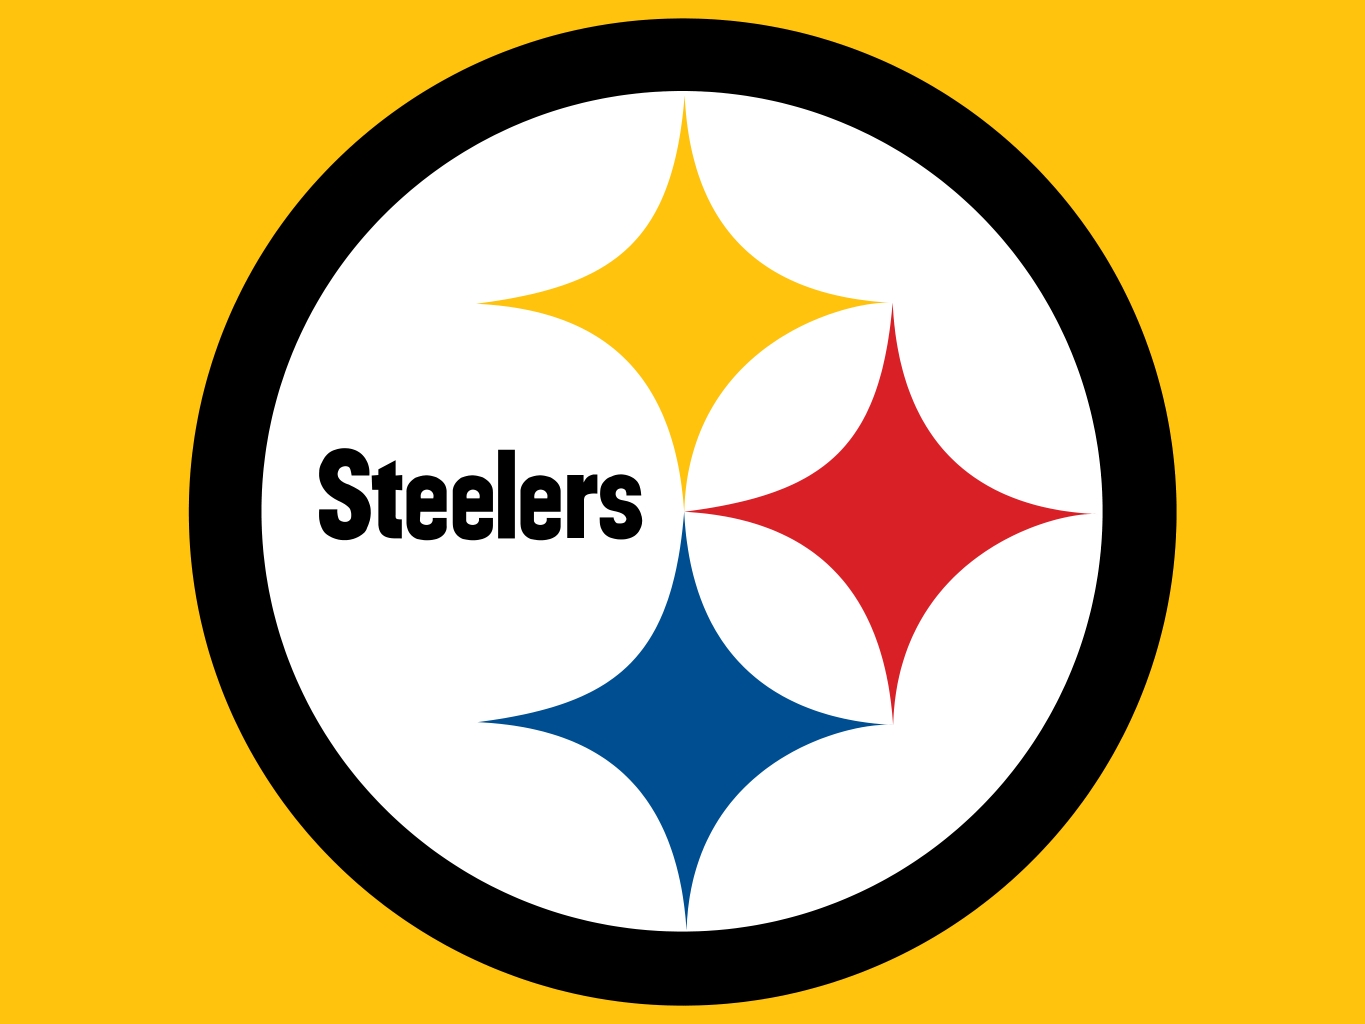 Pittsburgh Steelers Backgrounds, Compatible - PC, Mobile, Gadgets| 1365x1024 px